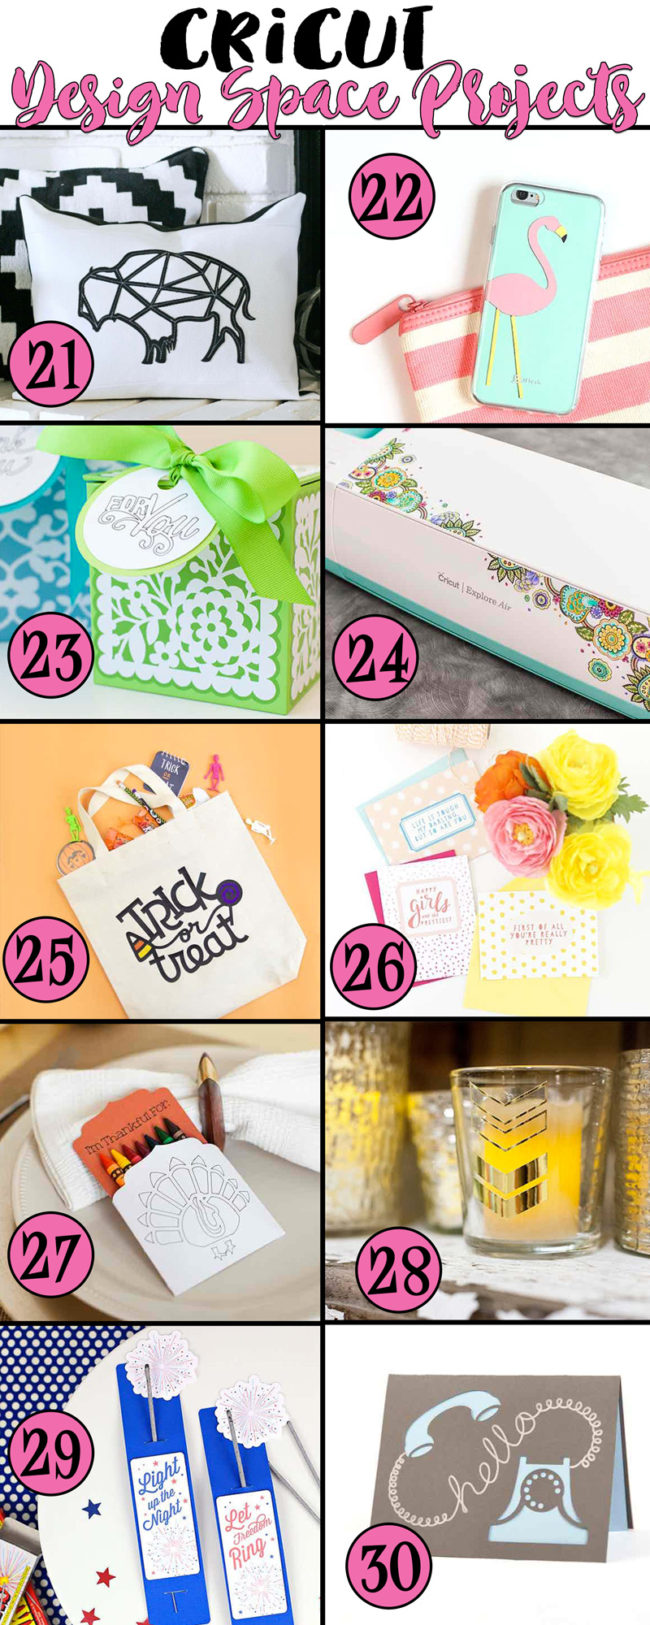 30 Cricut Project Ideas and I'm in love... With a Machine! - inkhappi